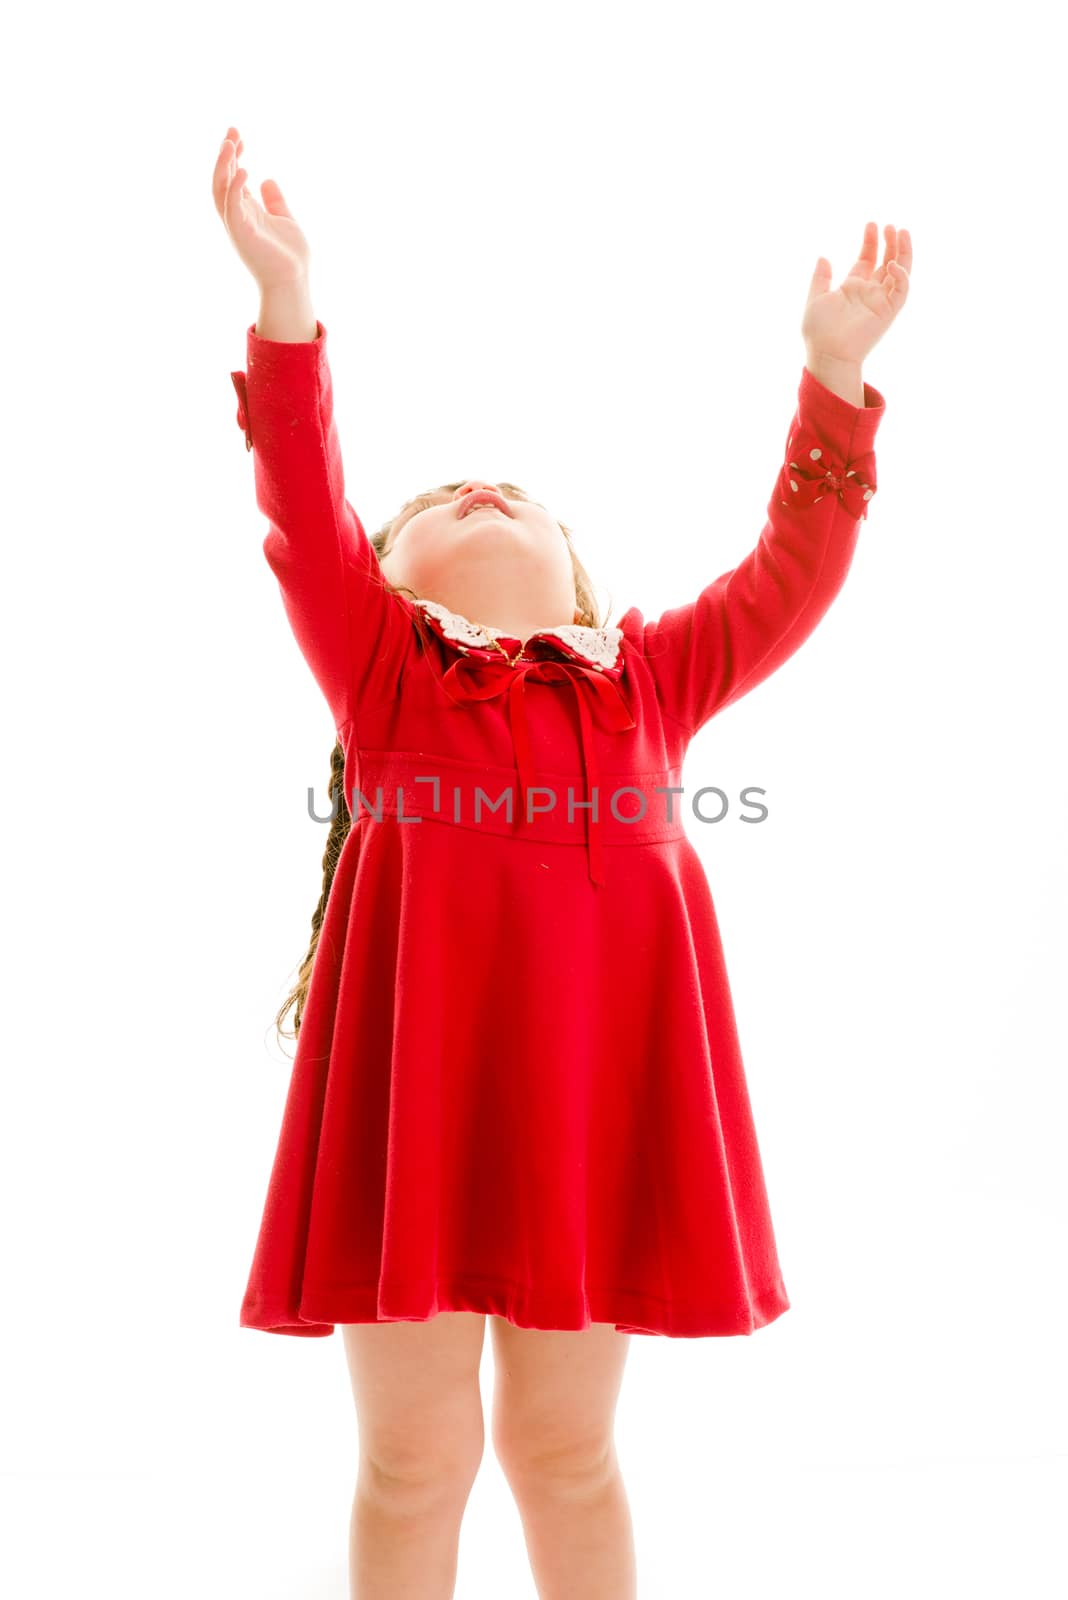 Young child with hands up in the air looking up.